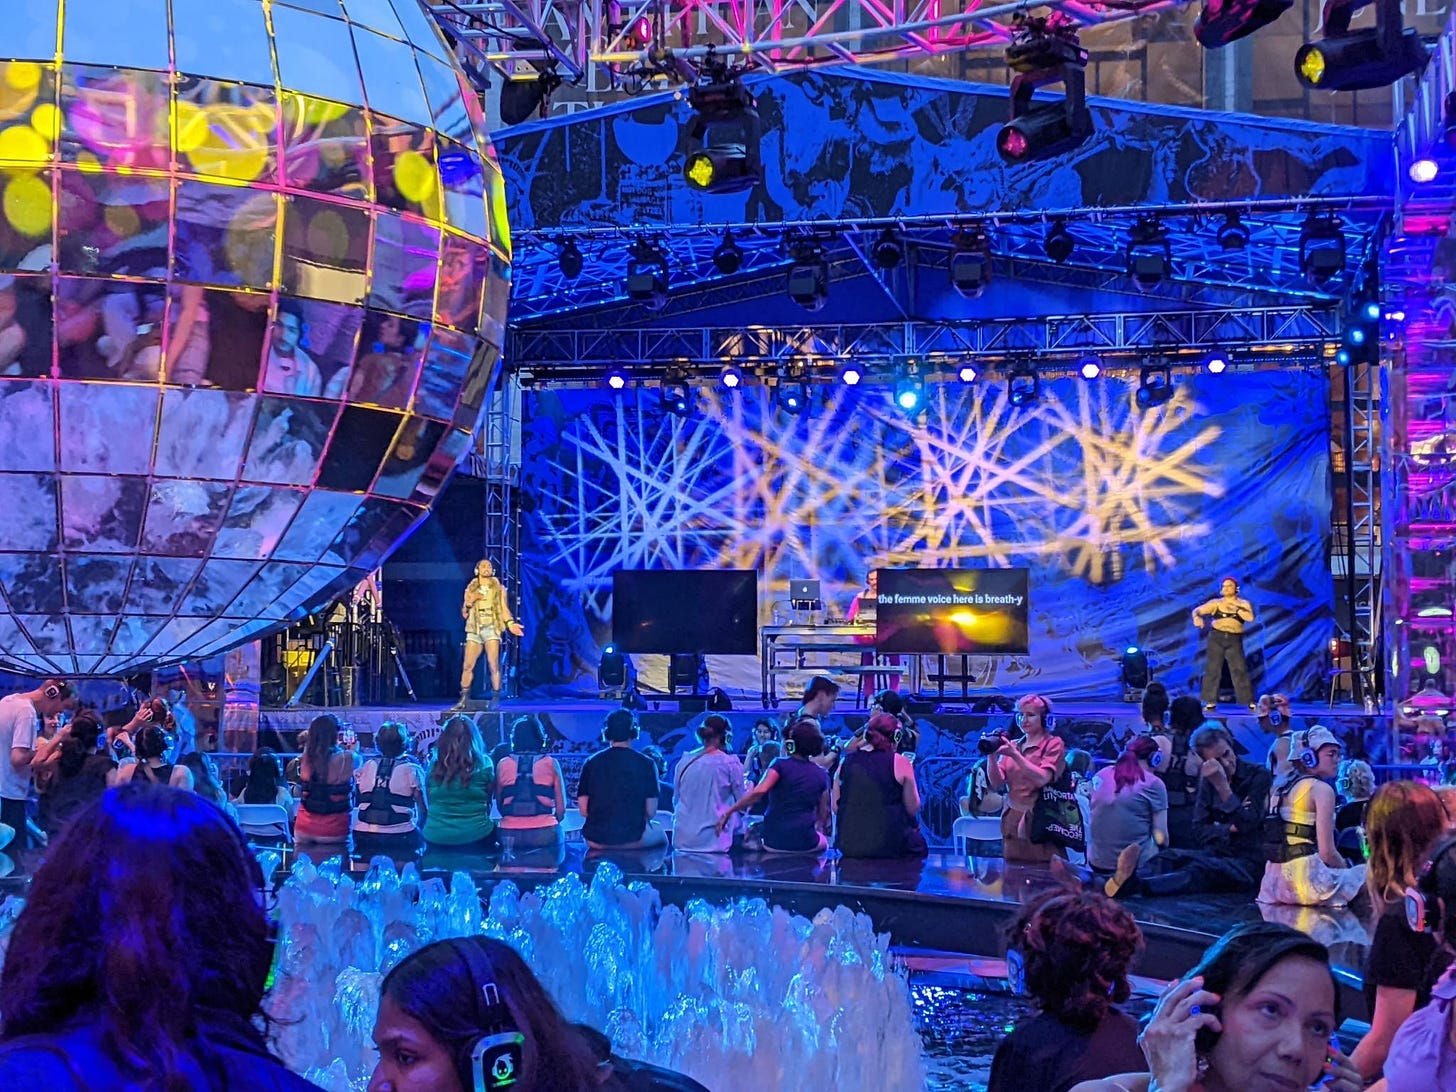 The outdoor dance floor at Lincoln Center is bathed in blues and purples. A giant 10 foot disco ball hangs over babbling fountains. People wear headsets, lounging. There is a big stage with an ASL interpreter, dancer, and DJ in between two screens. One says ‘the femme voice here is breath-y.”